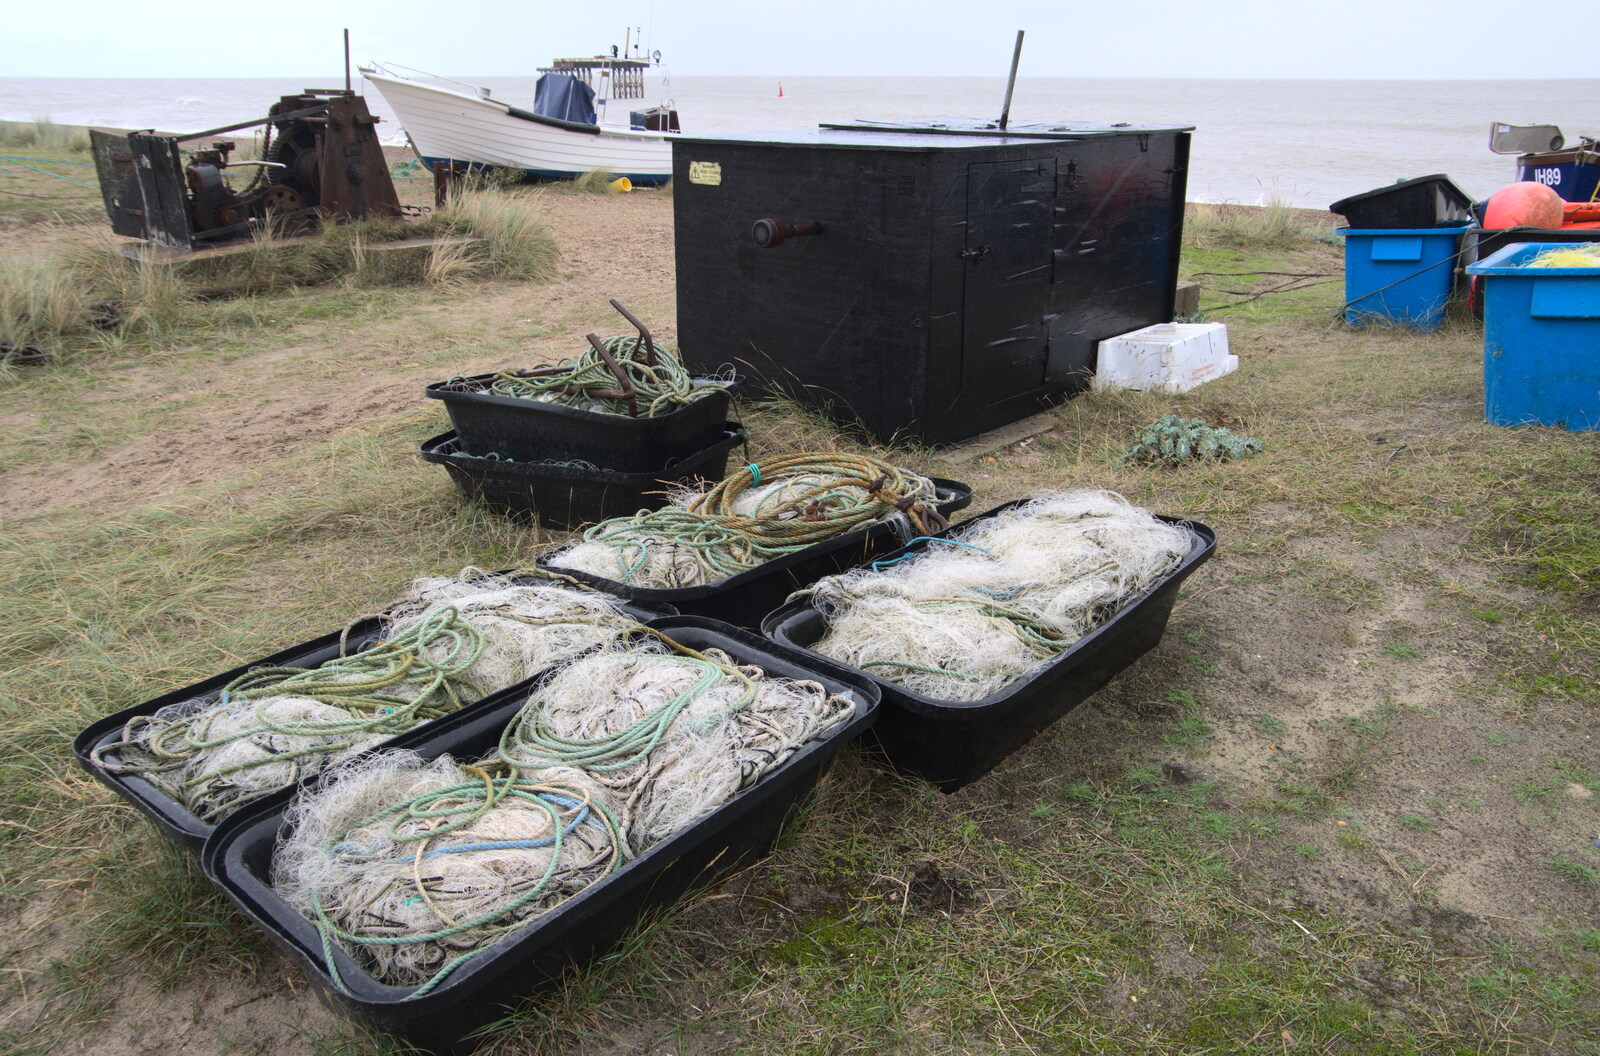 Trays of fine fishing net and ropes from Sizewell Beach and the Lion Pub, Sizewell and Theberton, Suffolk - 4th October 2020